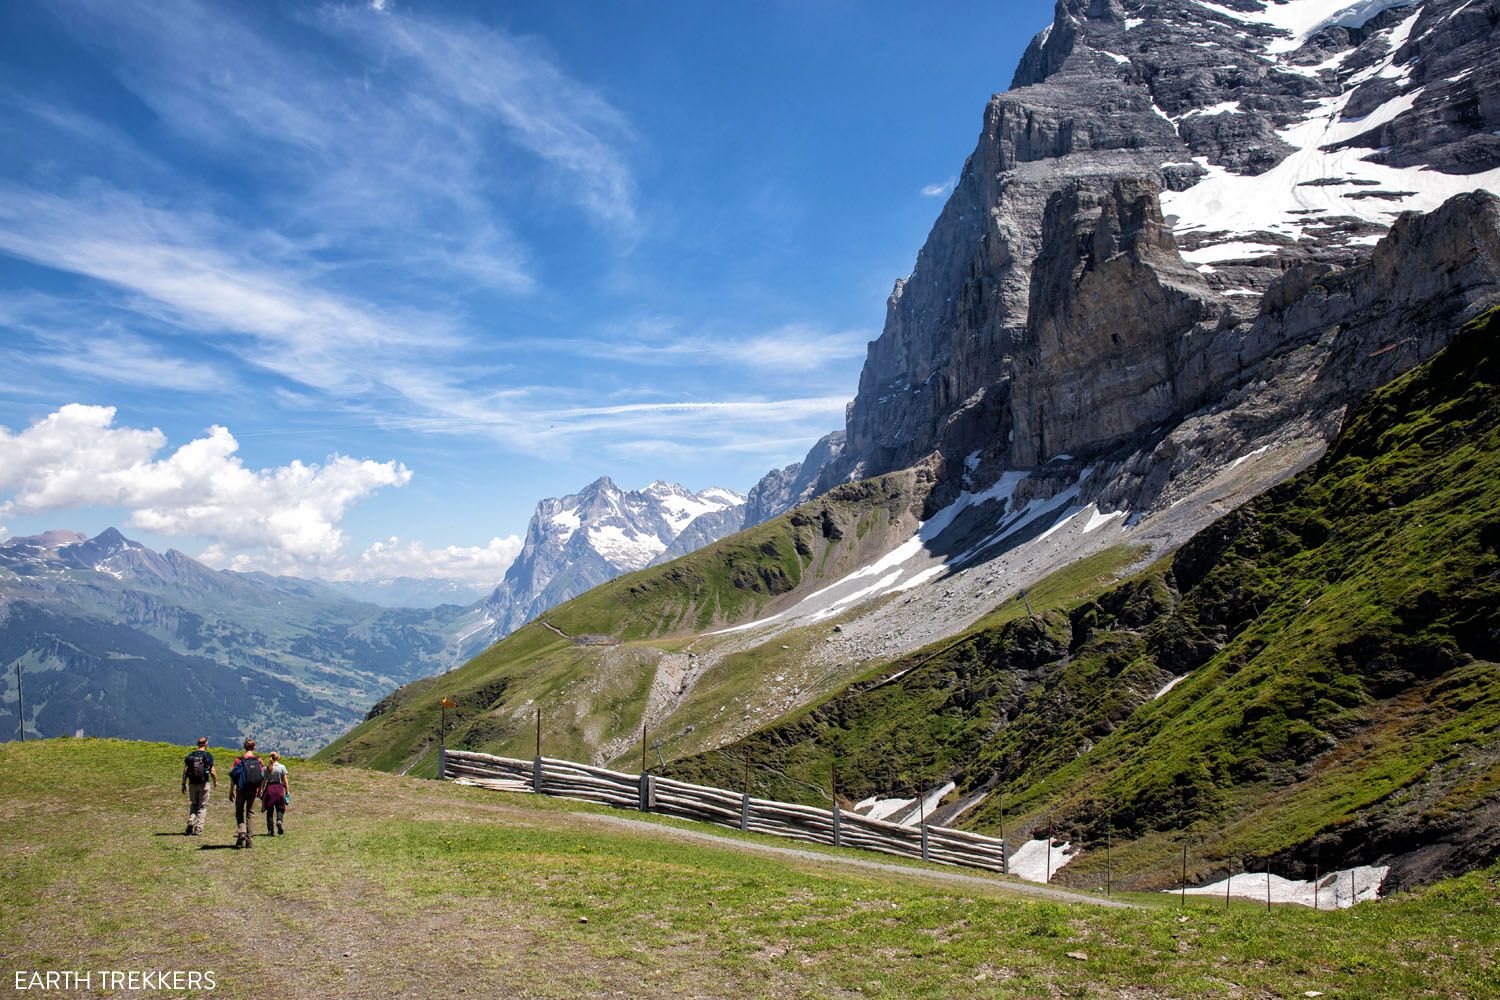 Start of the Eiger Trail